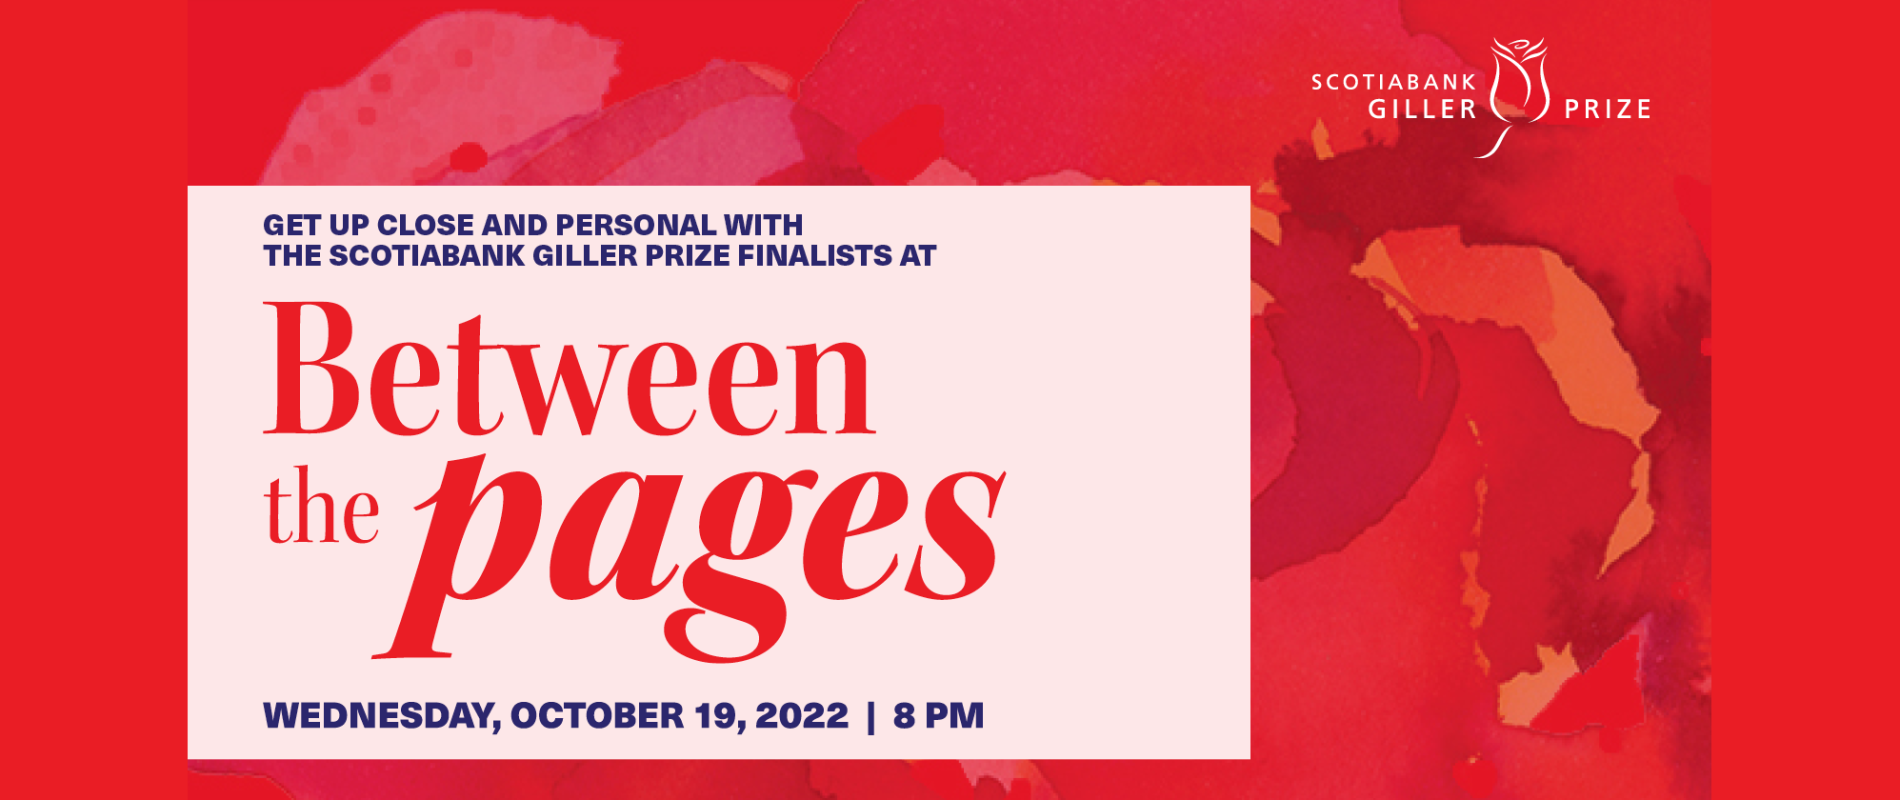 Scotiabank Giller Prize: An Evening with the Finalists Tickets